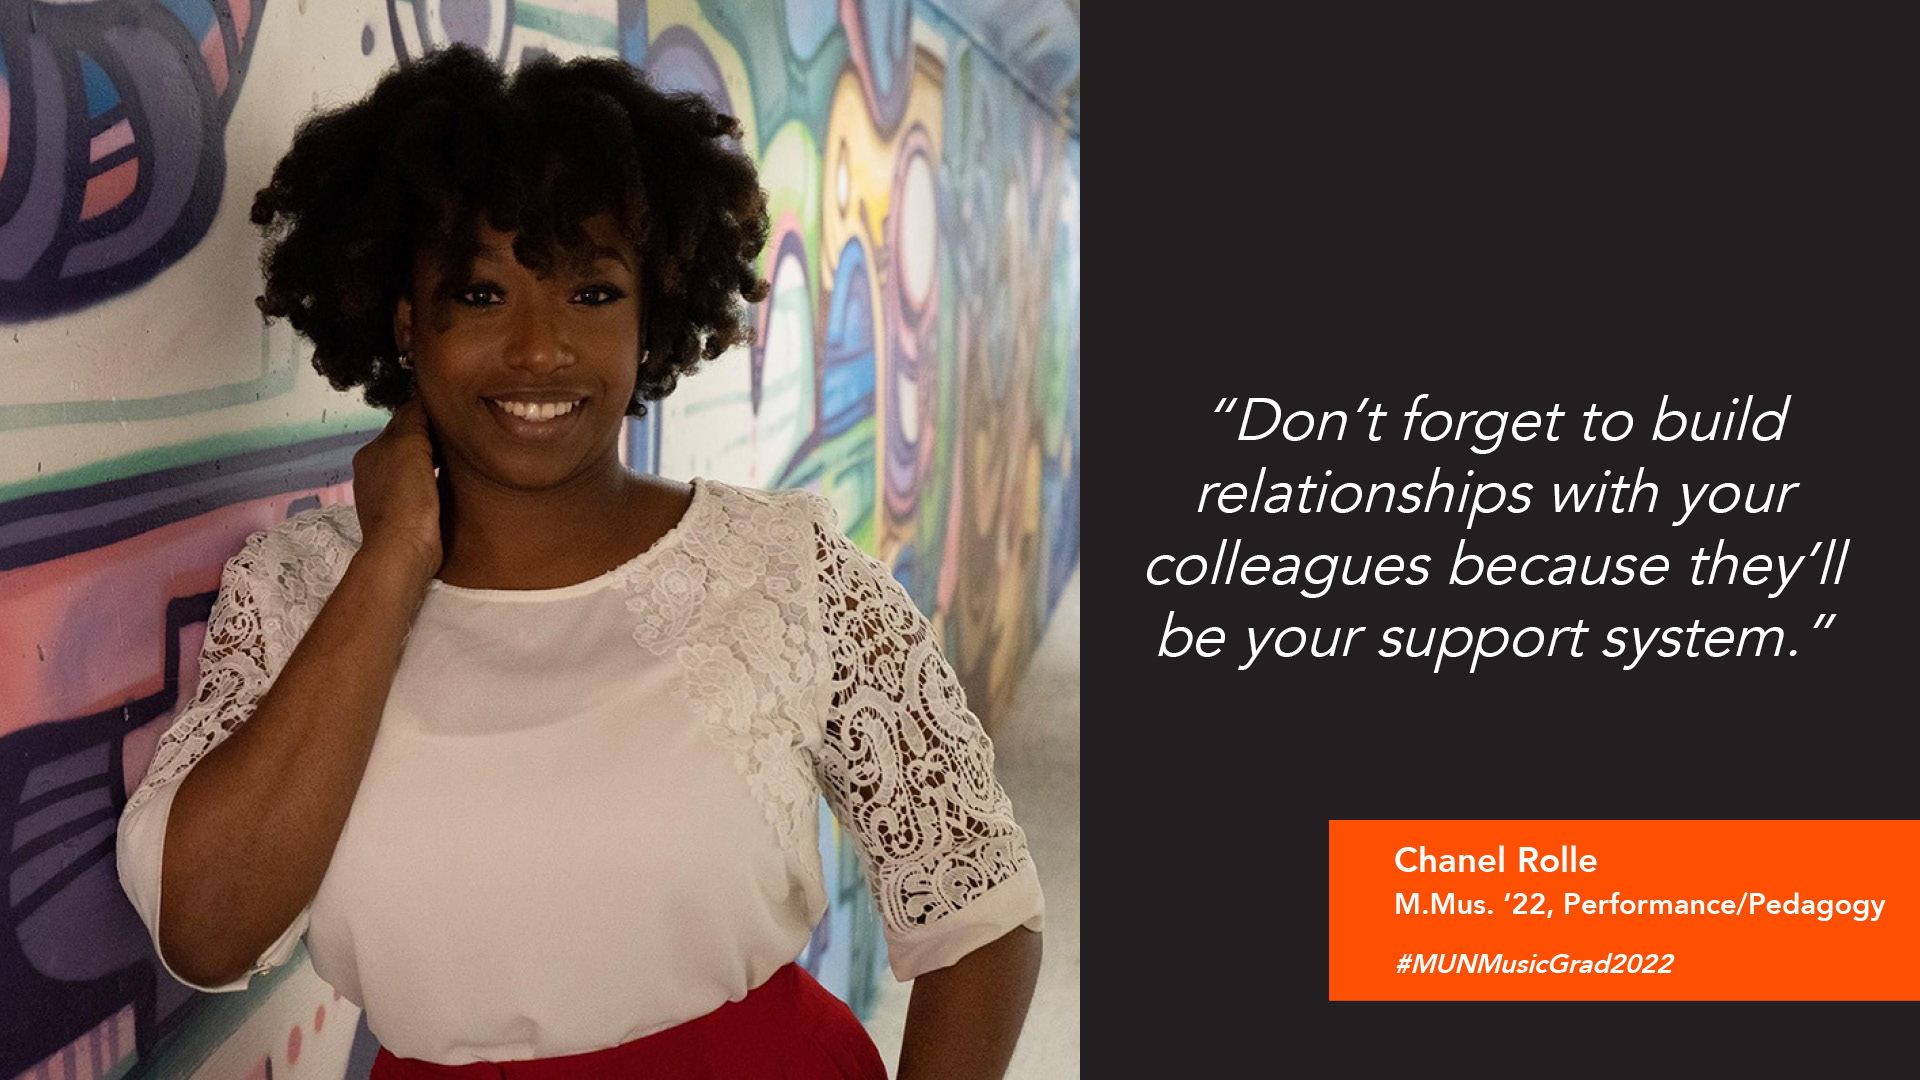 Chanel Rolle with quote